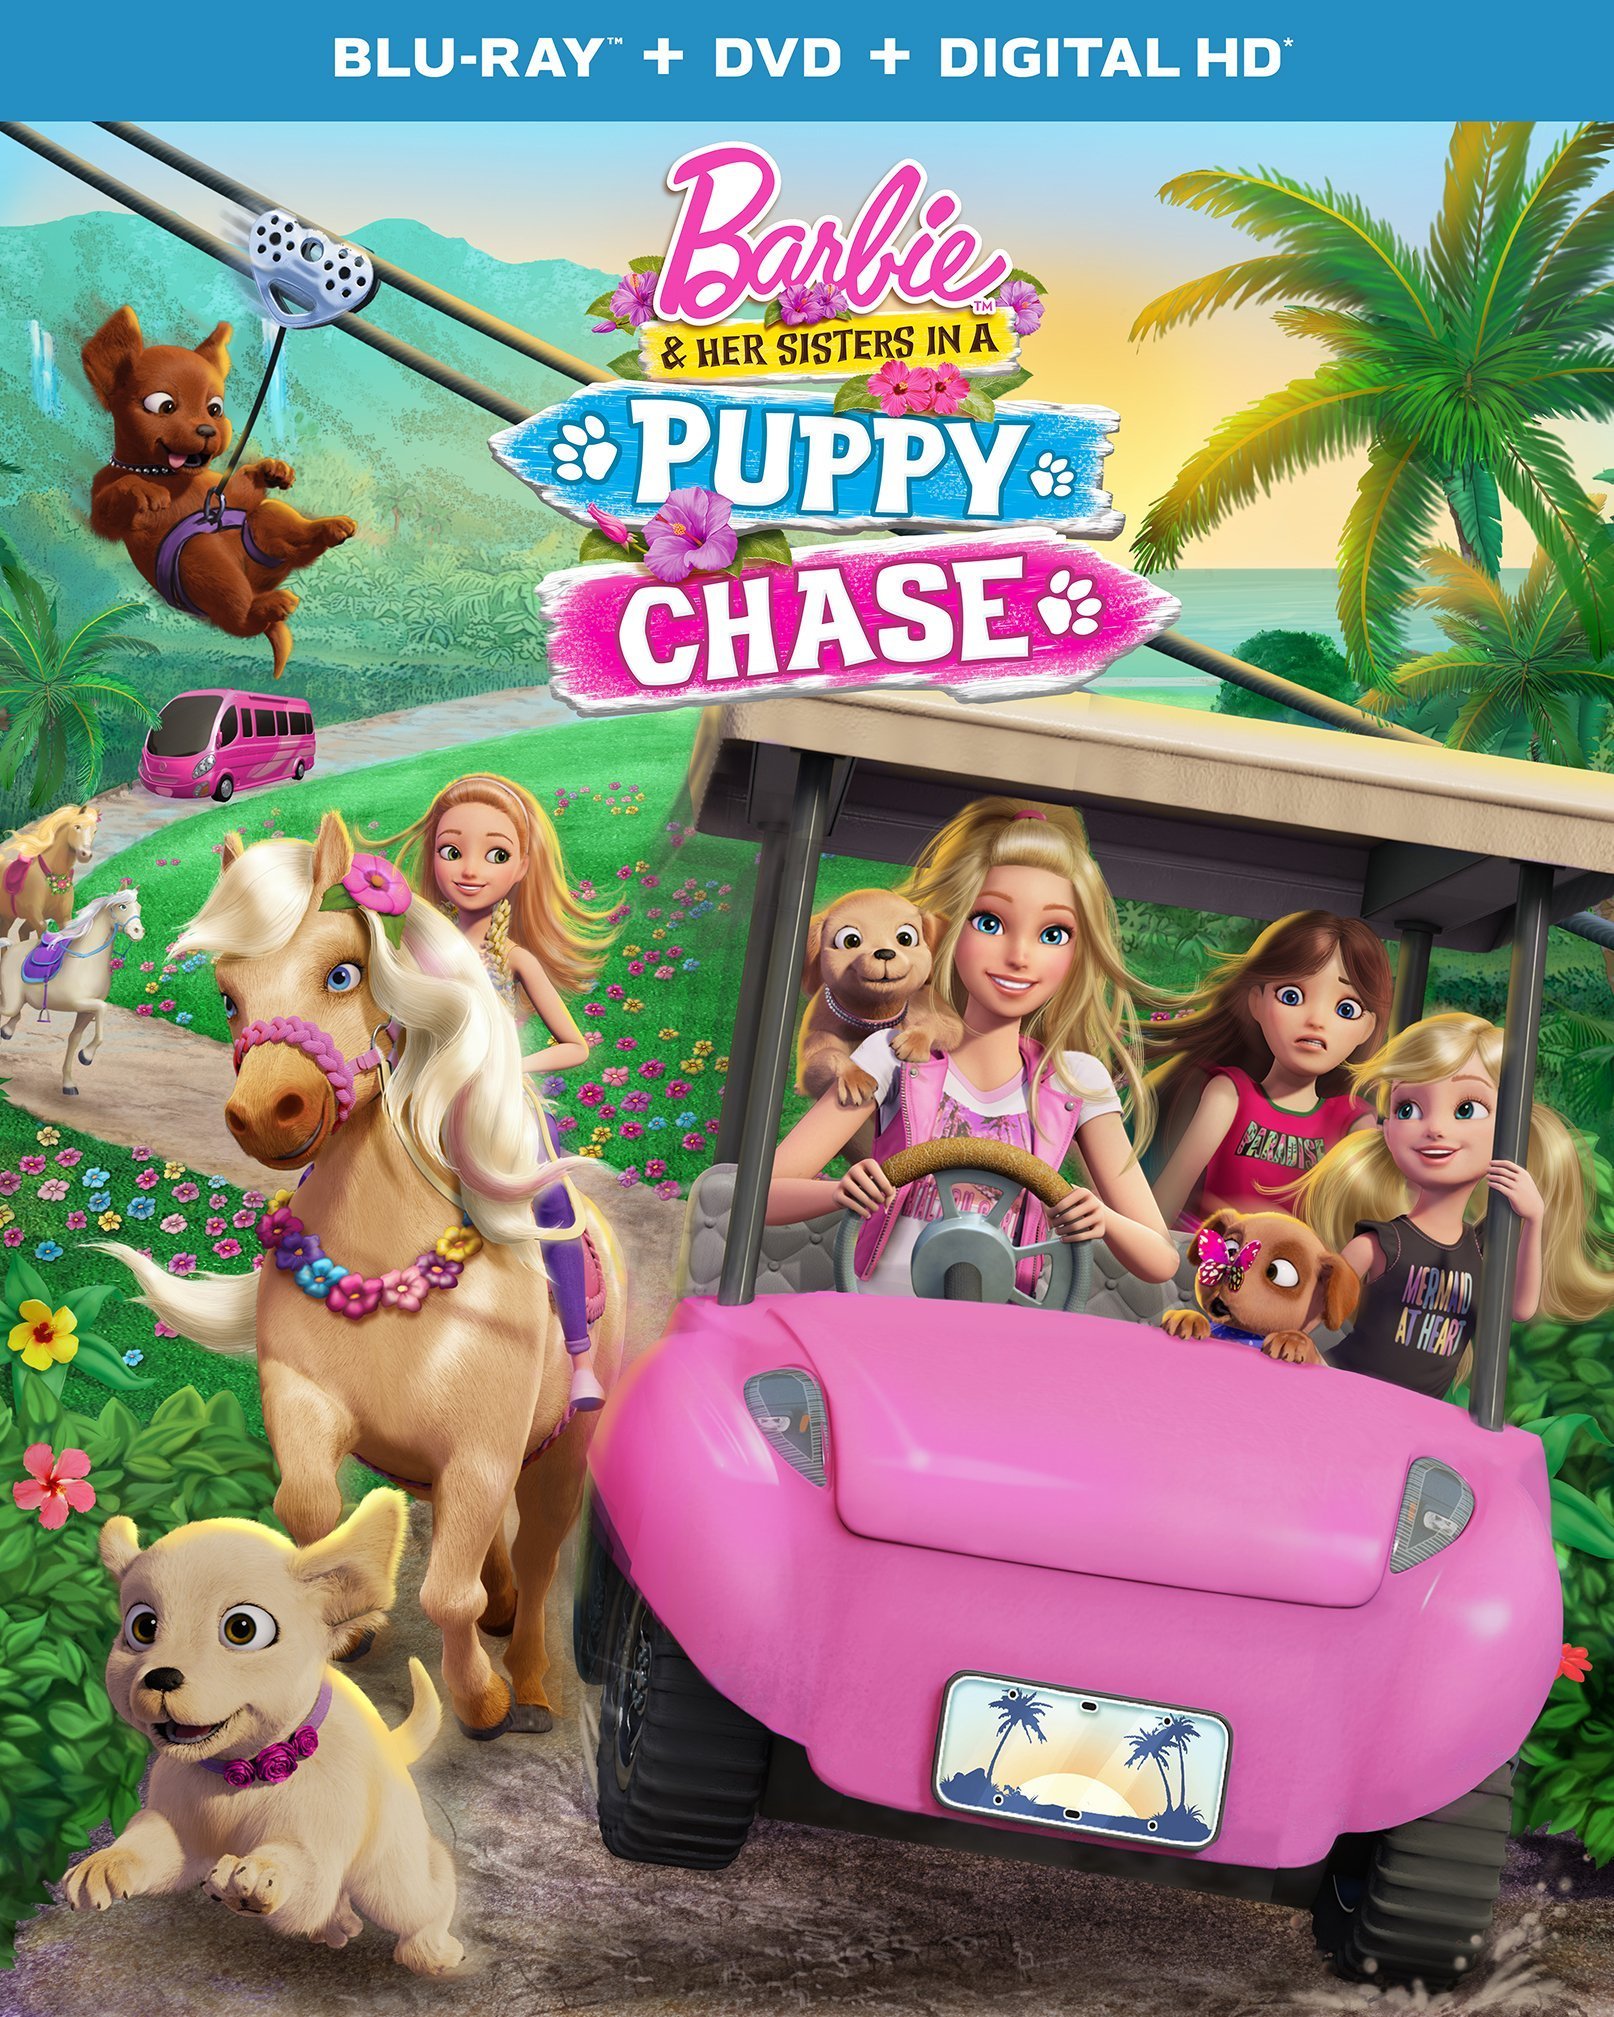 BARBIE & HER SISTERS IN PUPPY CHASE Blu-ray